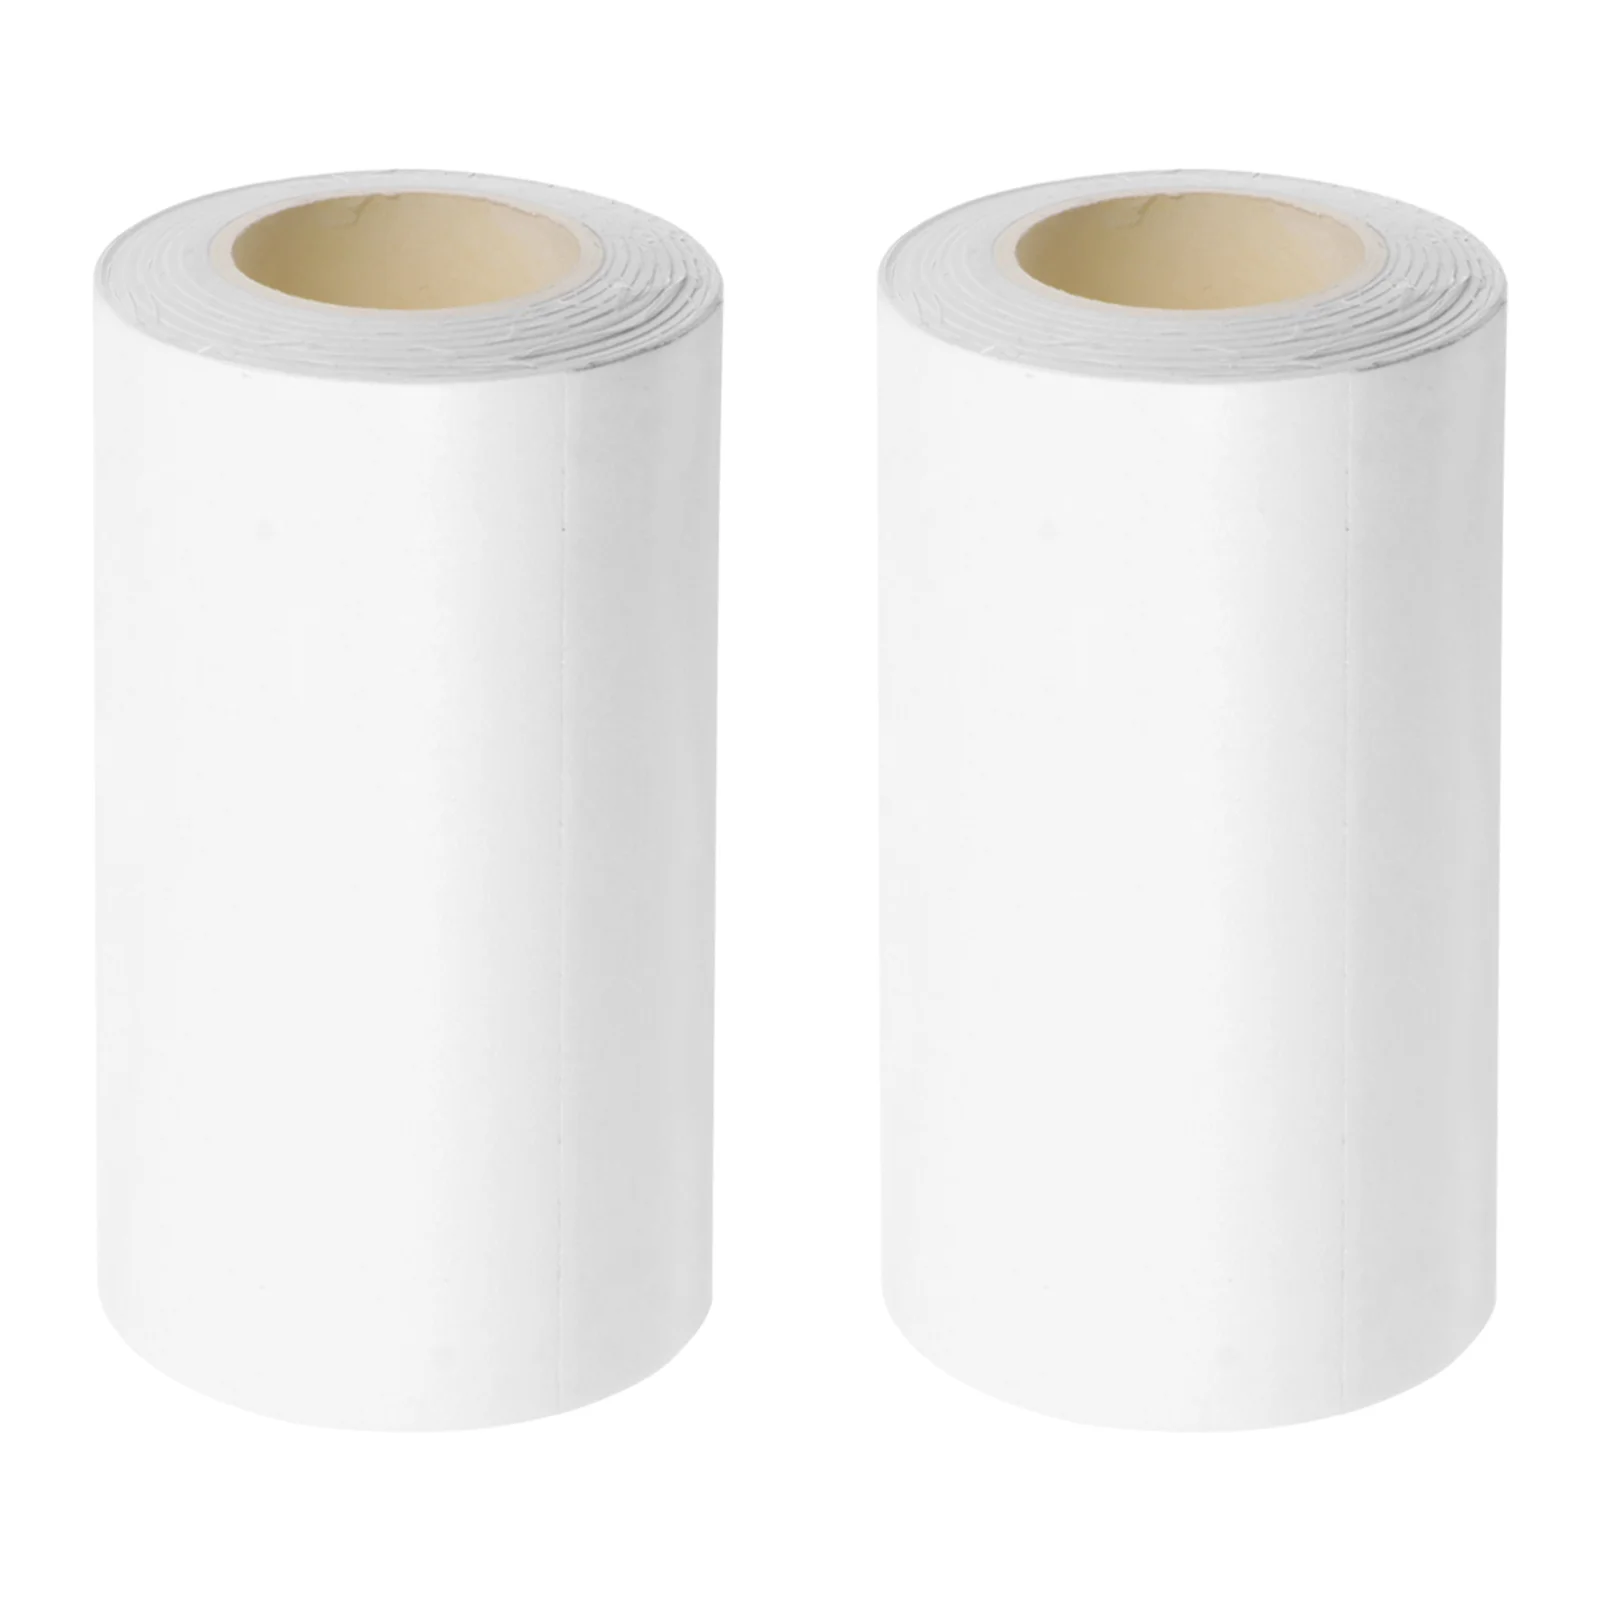 

2 Rolls Hand Account Release Paper Non-stick DIY Supply Double-sided Blank Tape